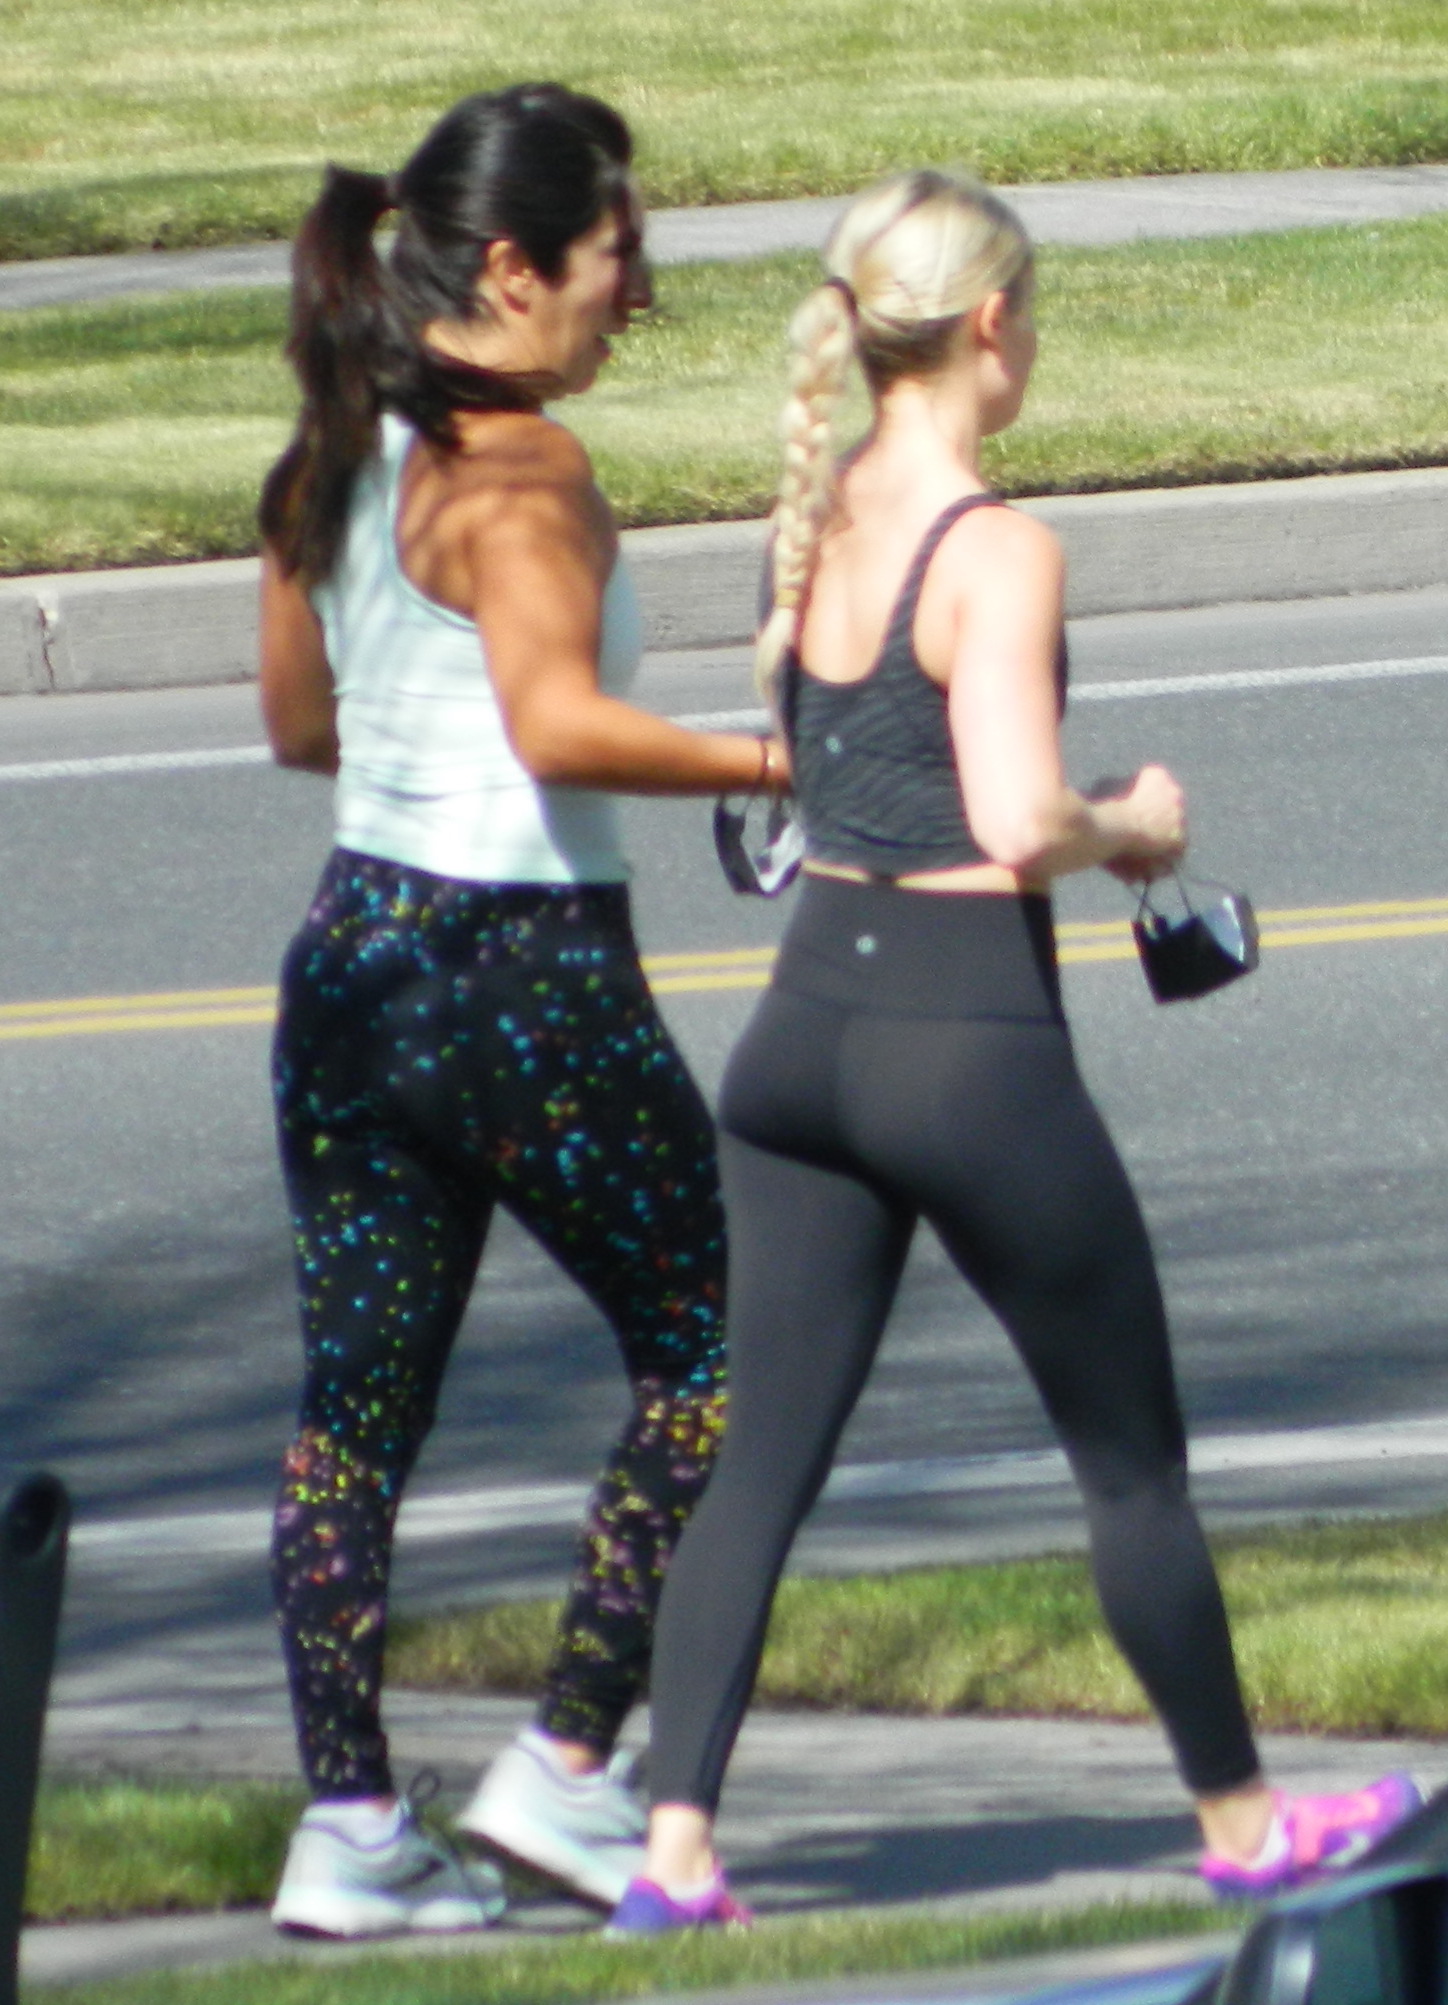 Crazy Blondes Flaunting Their Fit Asses in the Tightest Leggings [OC] -  Spandex, Leggings & Yoga Pants - Forum